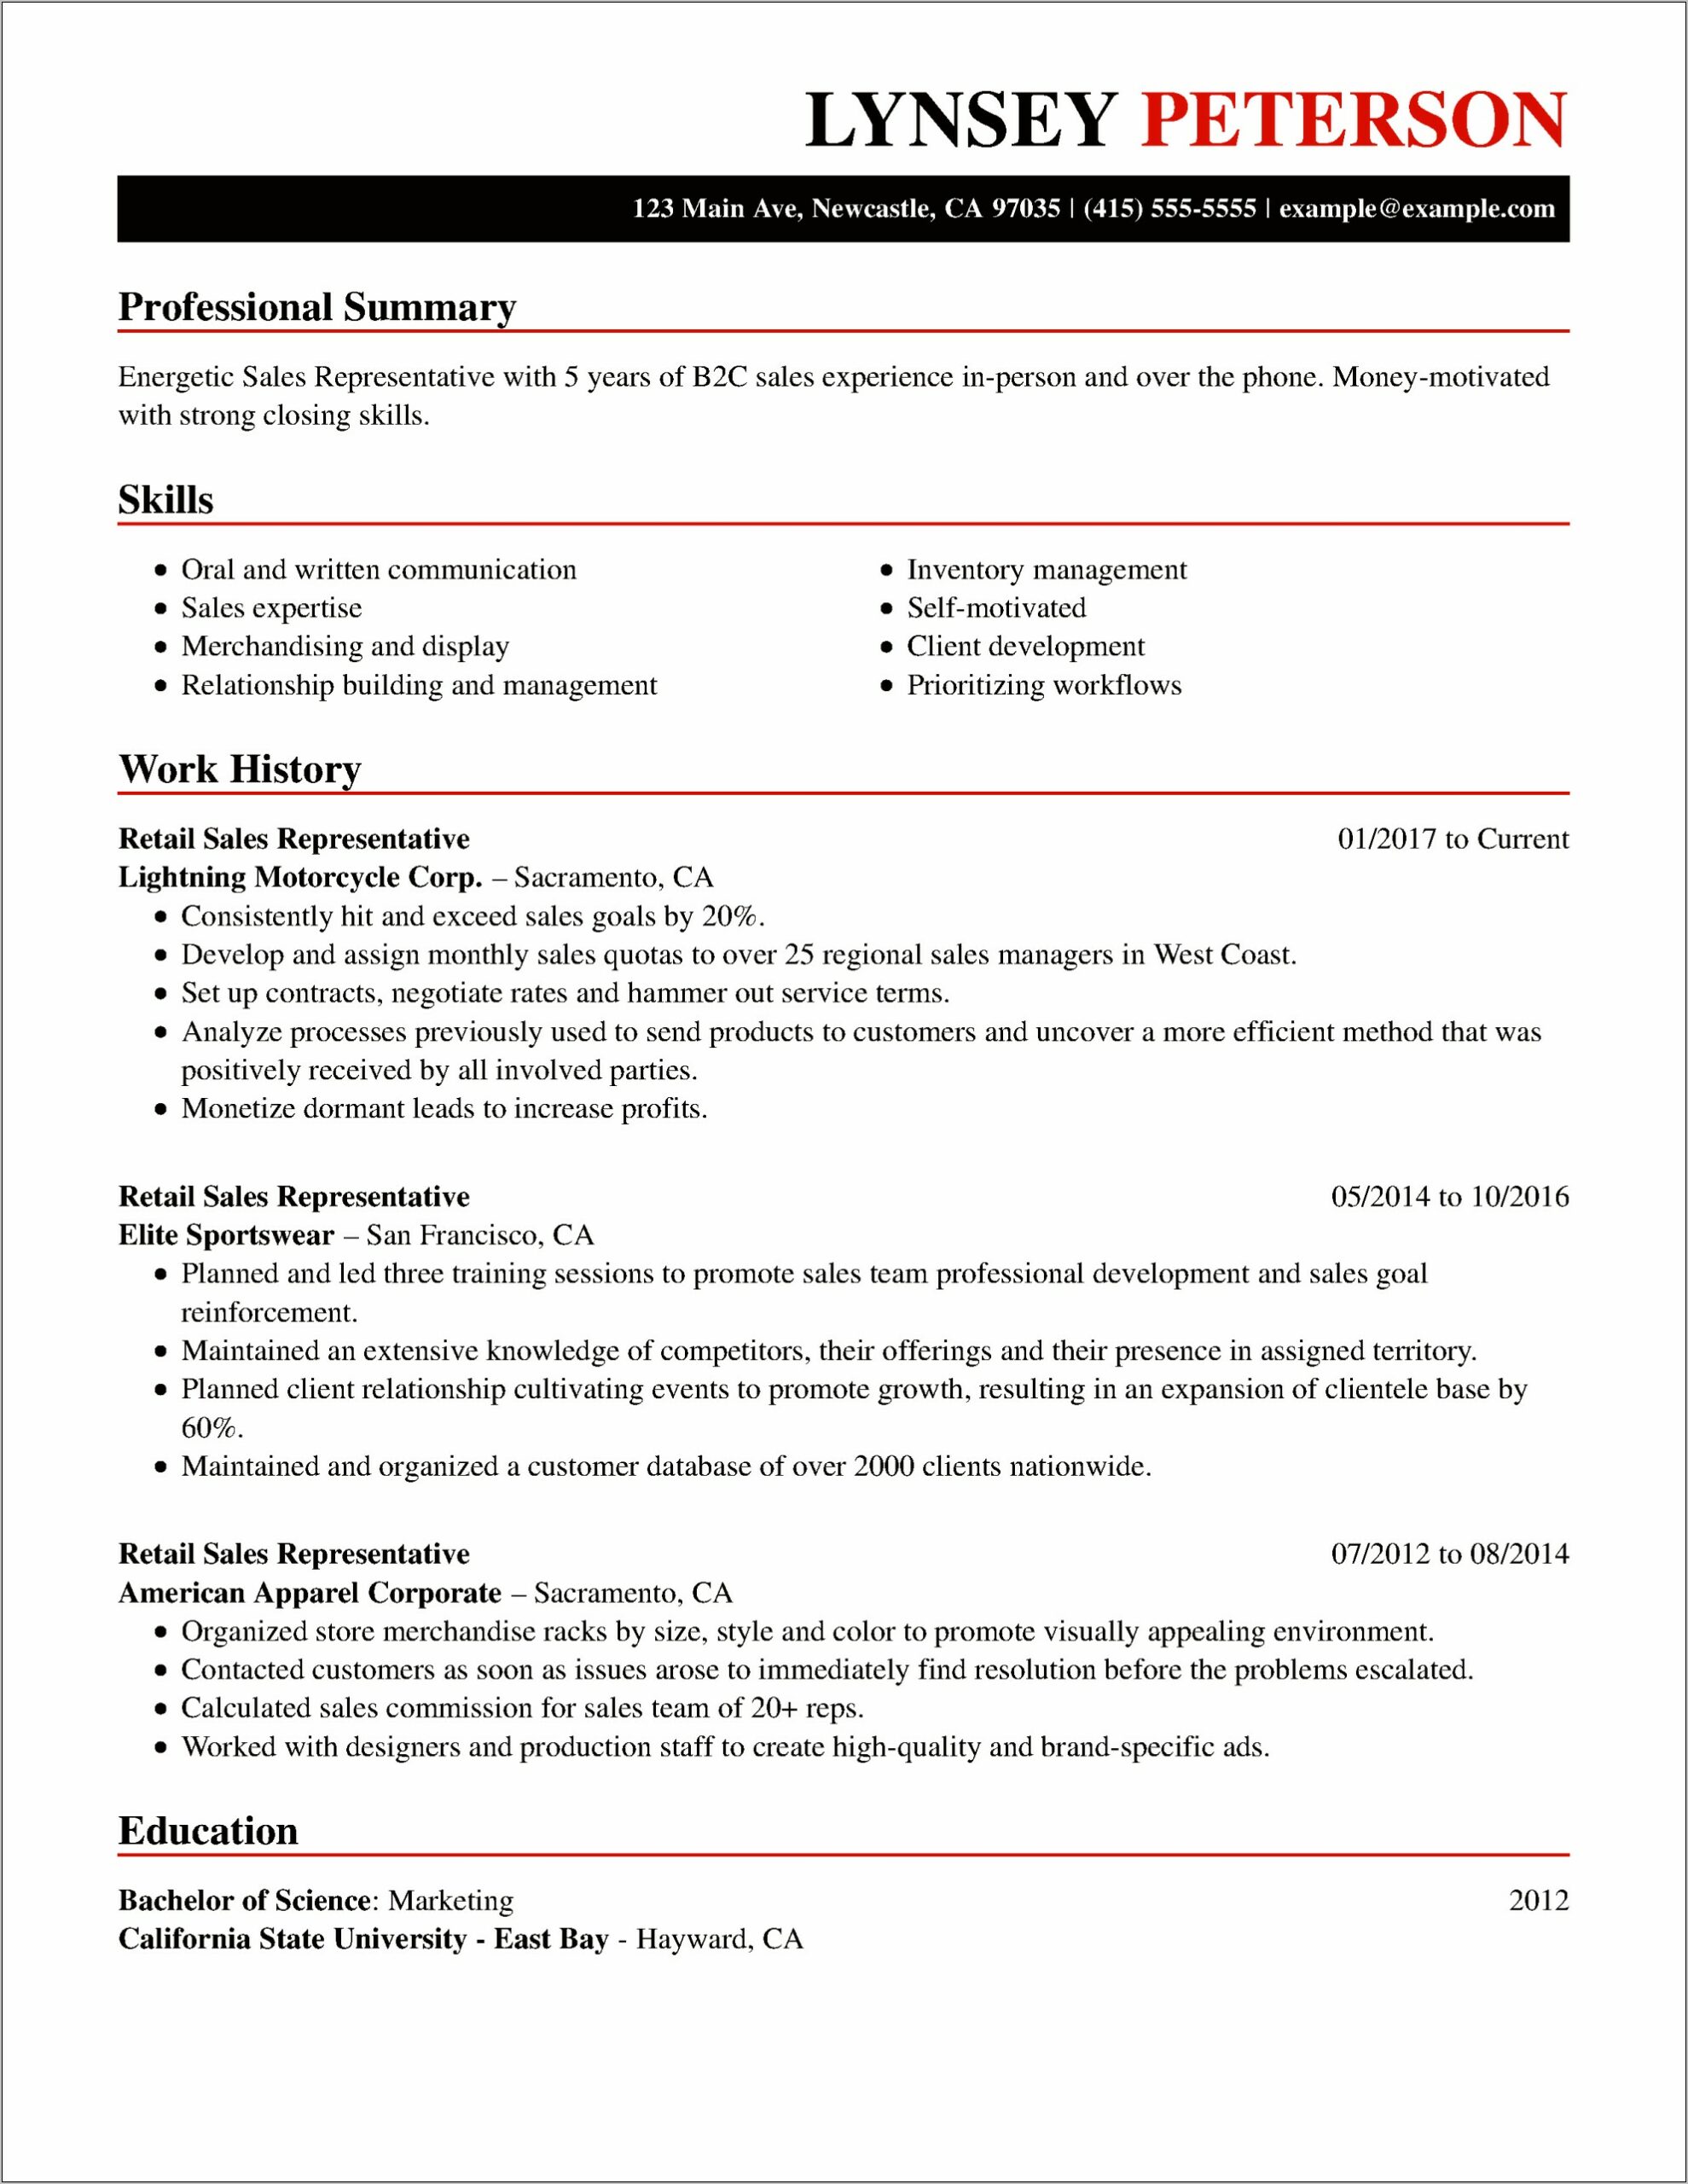 Resume Headline Examples For Mobile Carriers In Usa